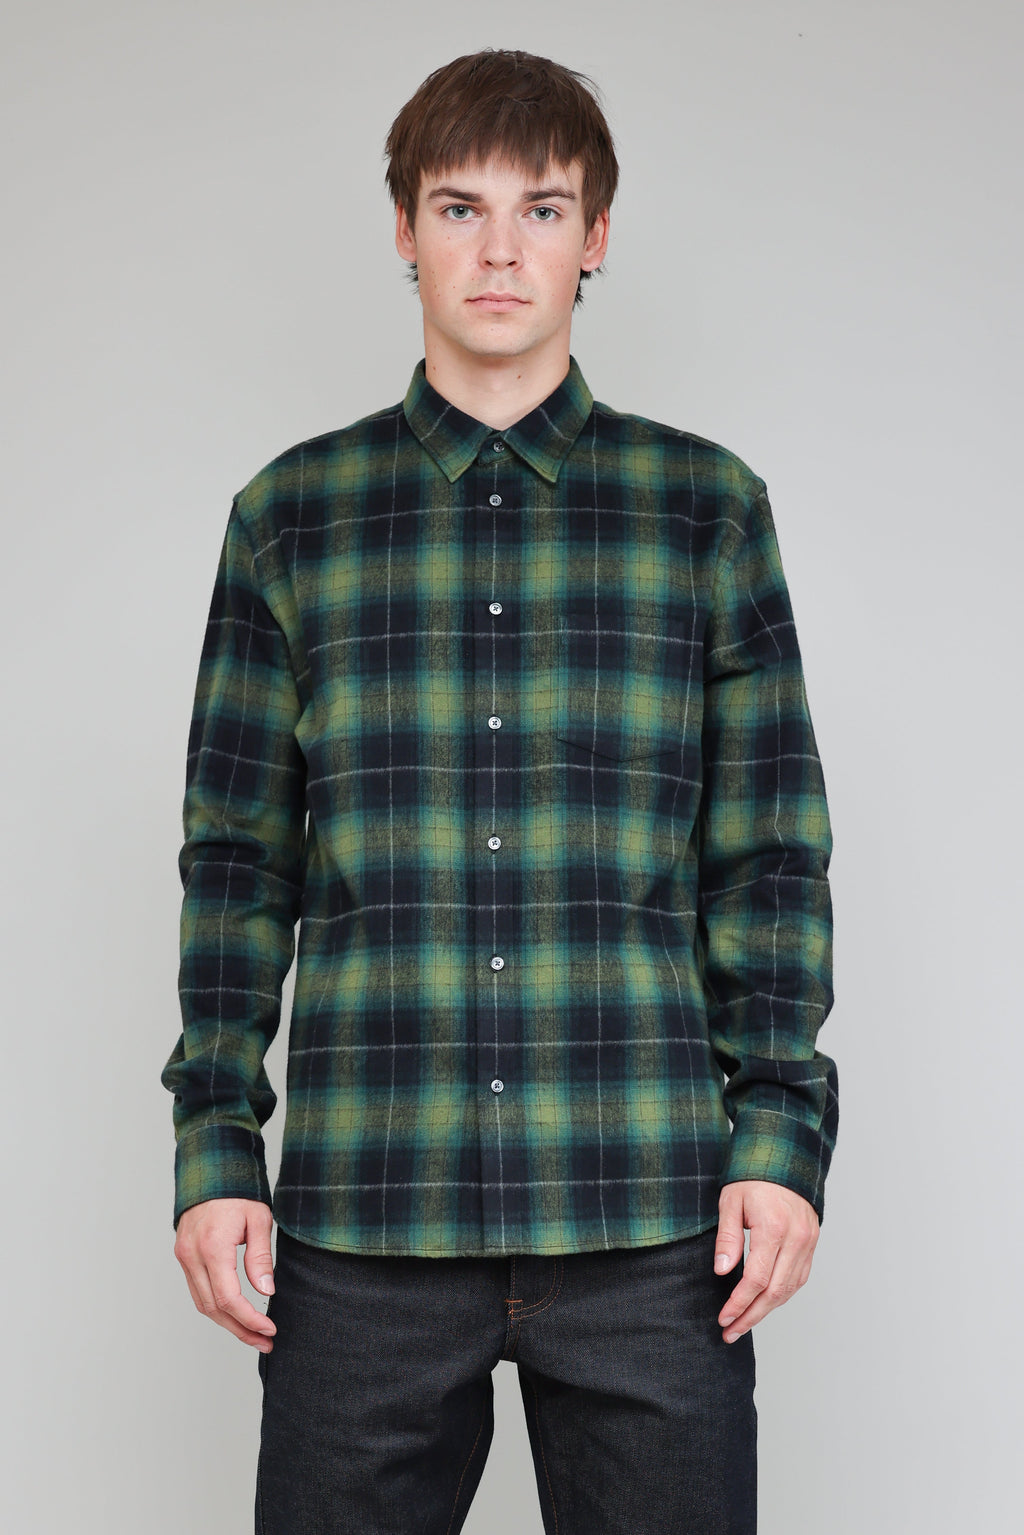 Japanese Shaggy Plaid in Green and Navy 02